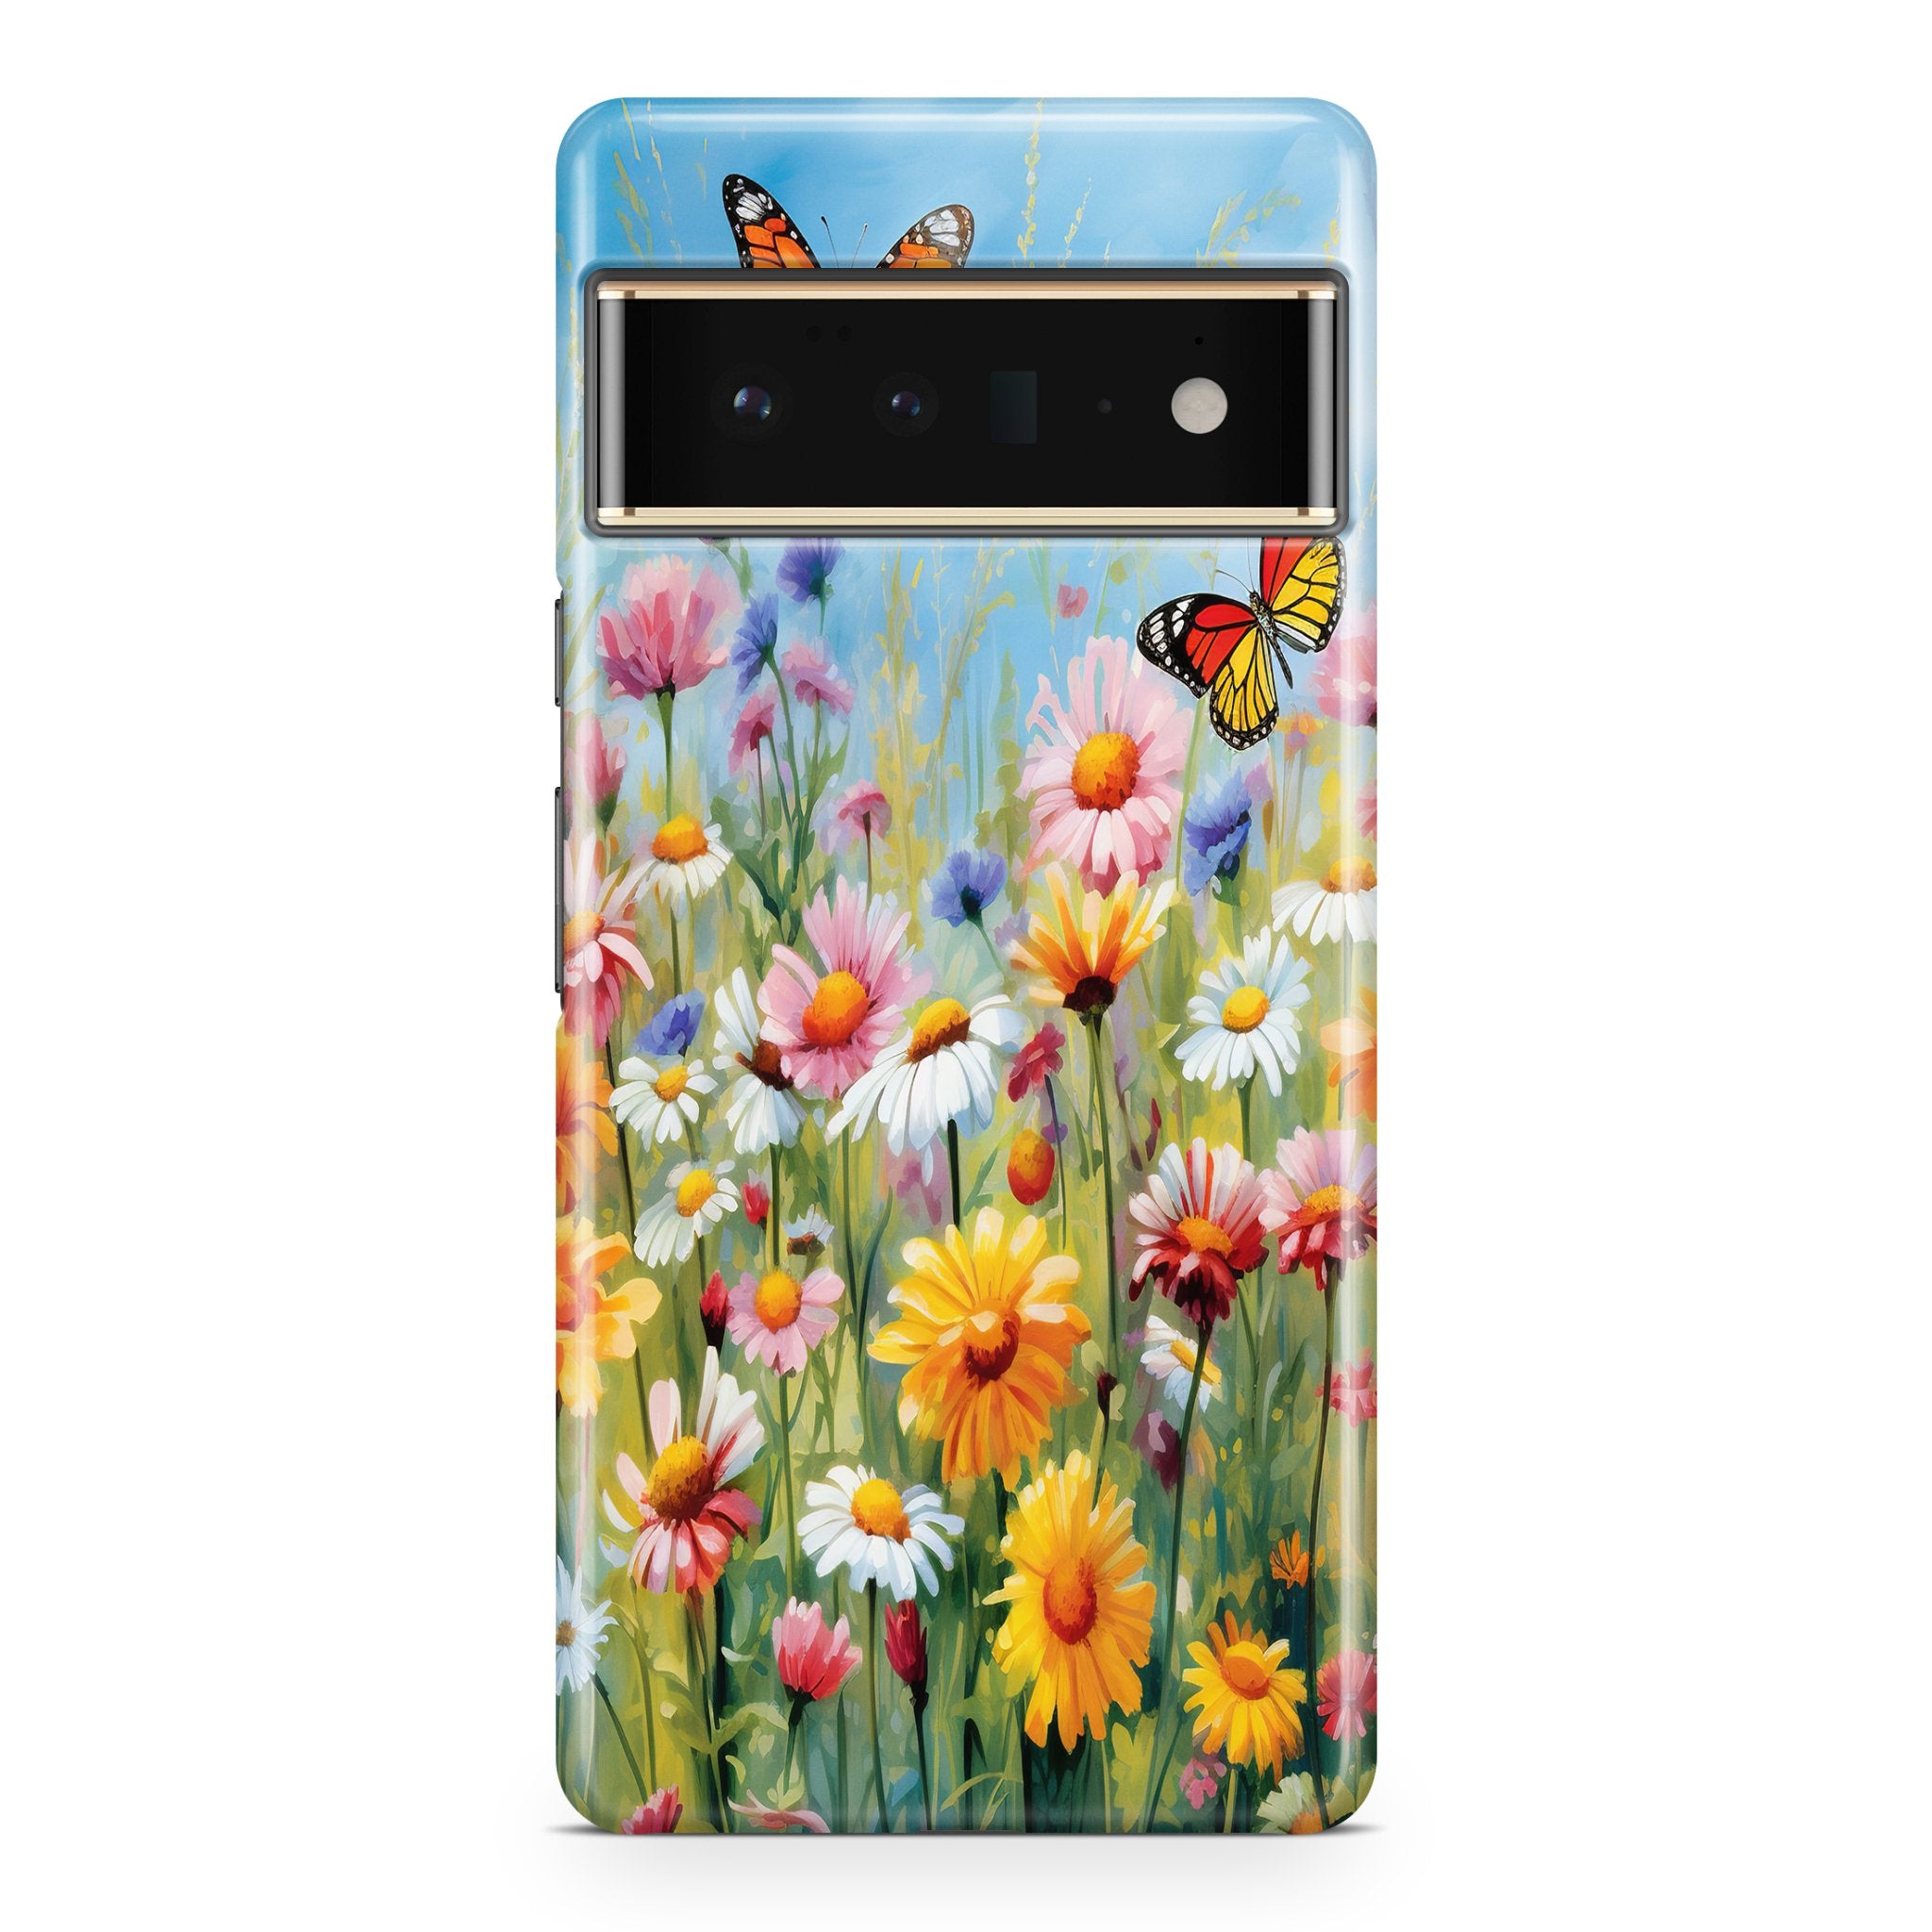 Spring Blossom - Google phone case designs by CaseSwagger